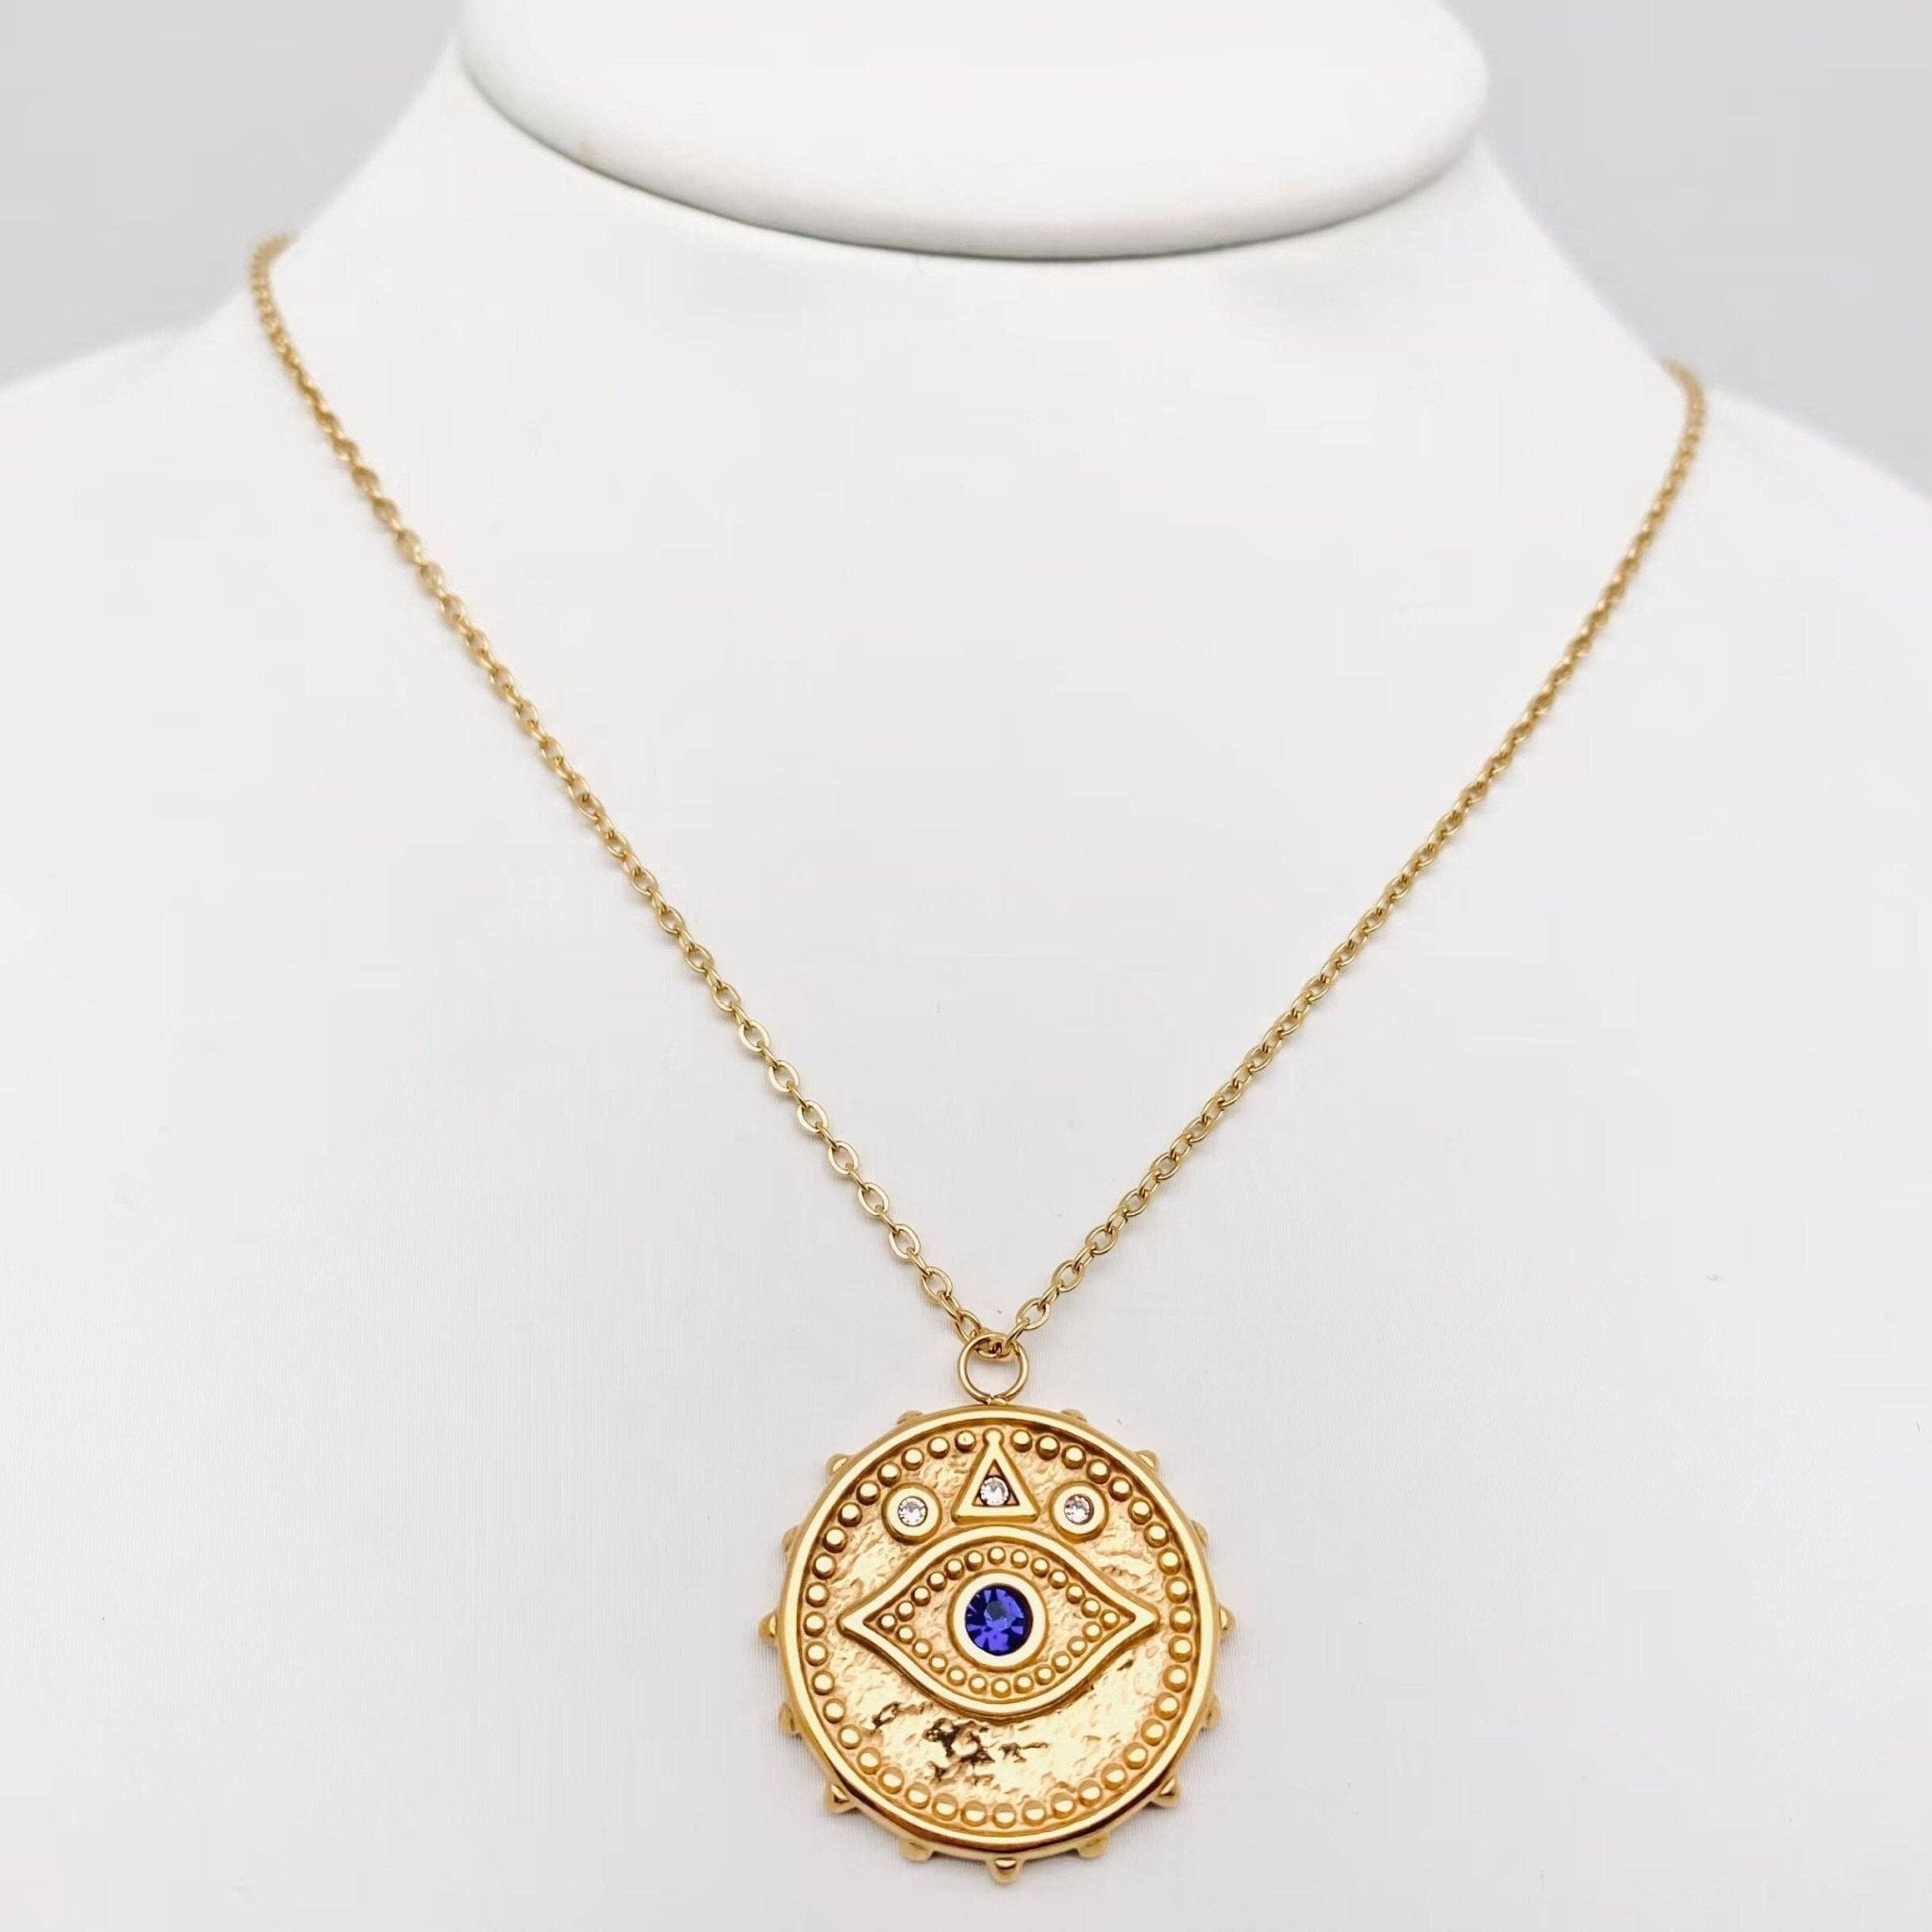 Embossed Blue Eye Charm Necklace - Spiral Circle